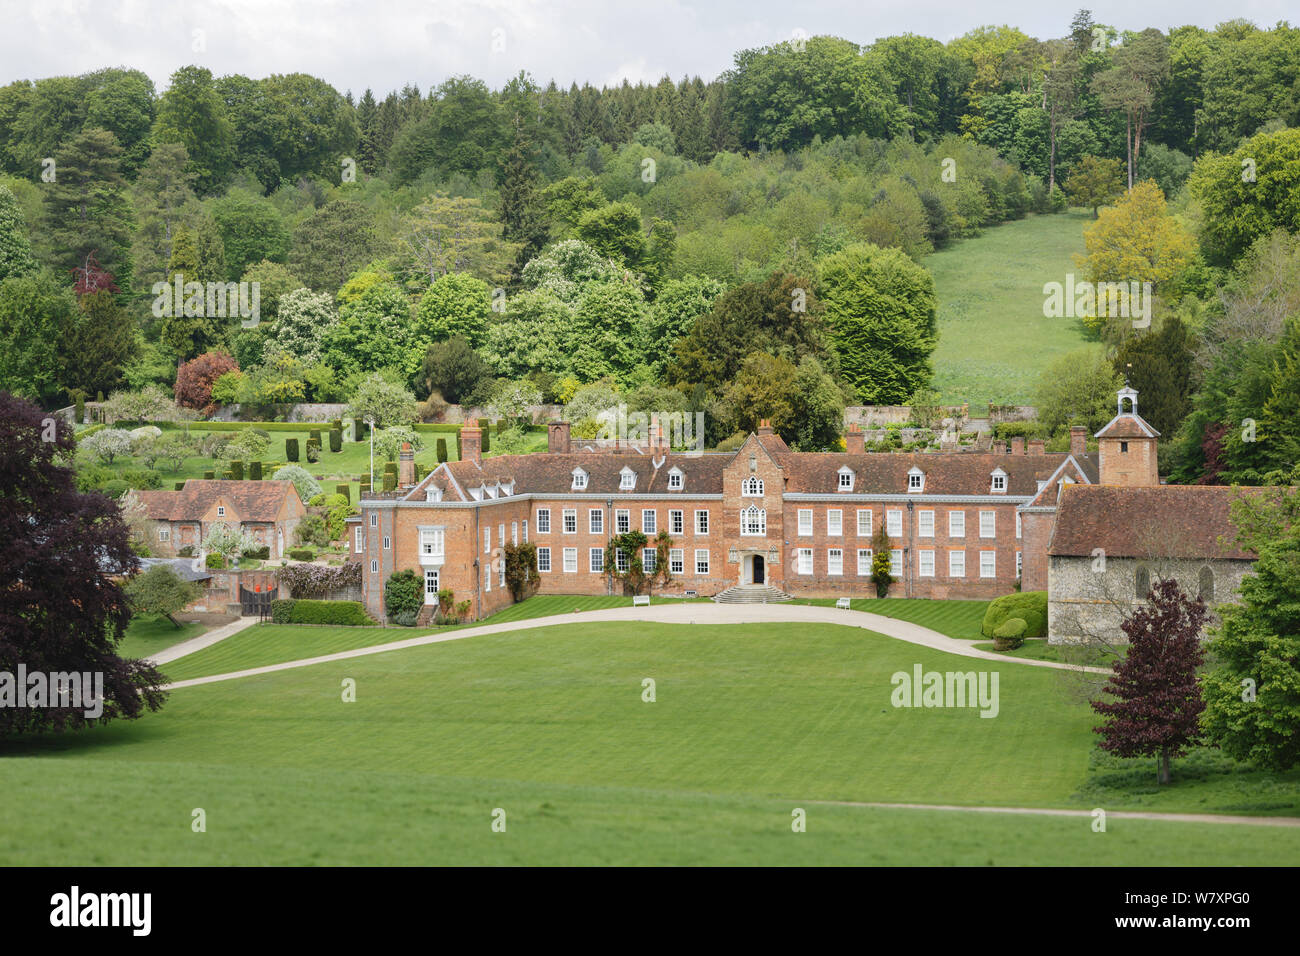 Henley-on-Thames, UK - May 25, 2013. Stonor Park, a historic country house and park situated in a valley in the Chiltern Hills near Henley-on-Thames, Stock Photo